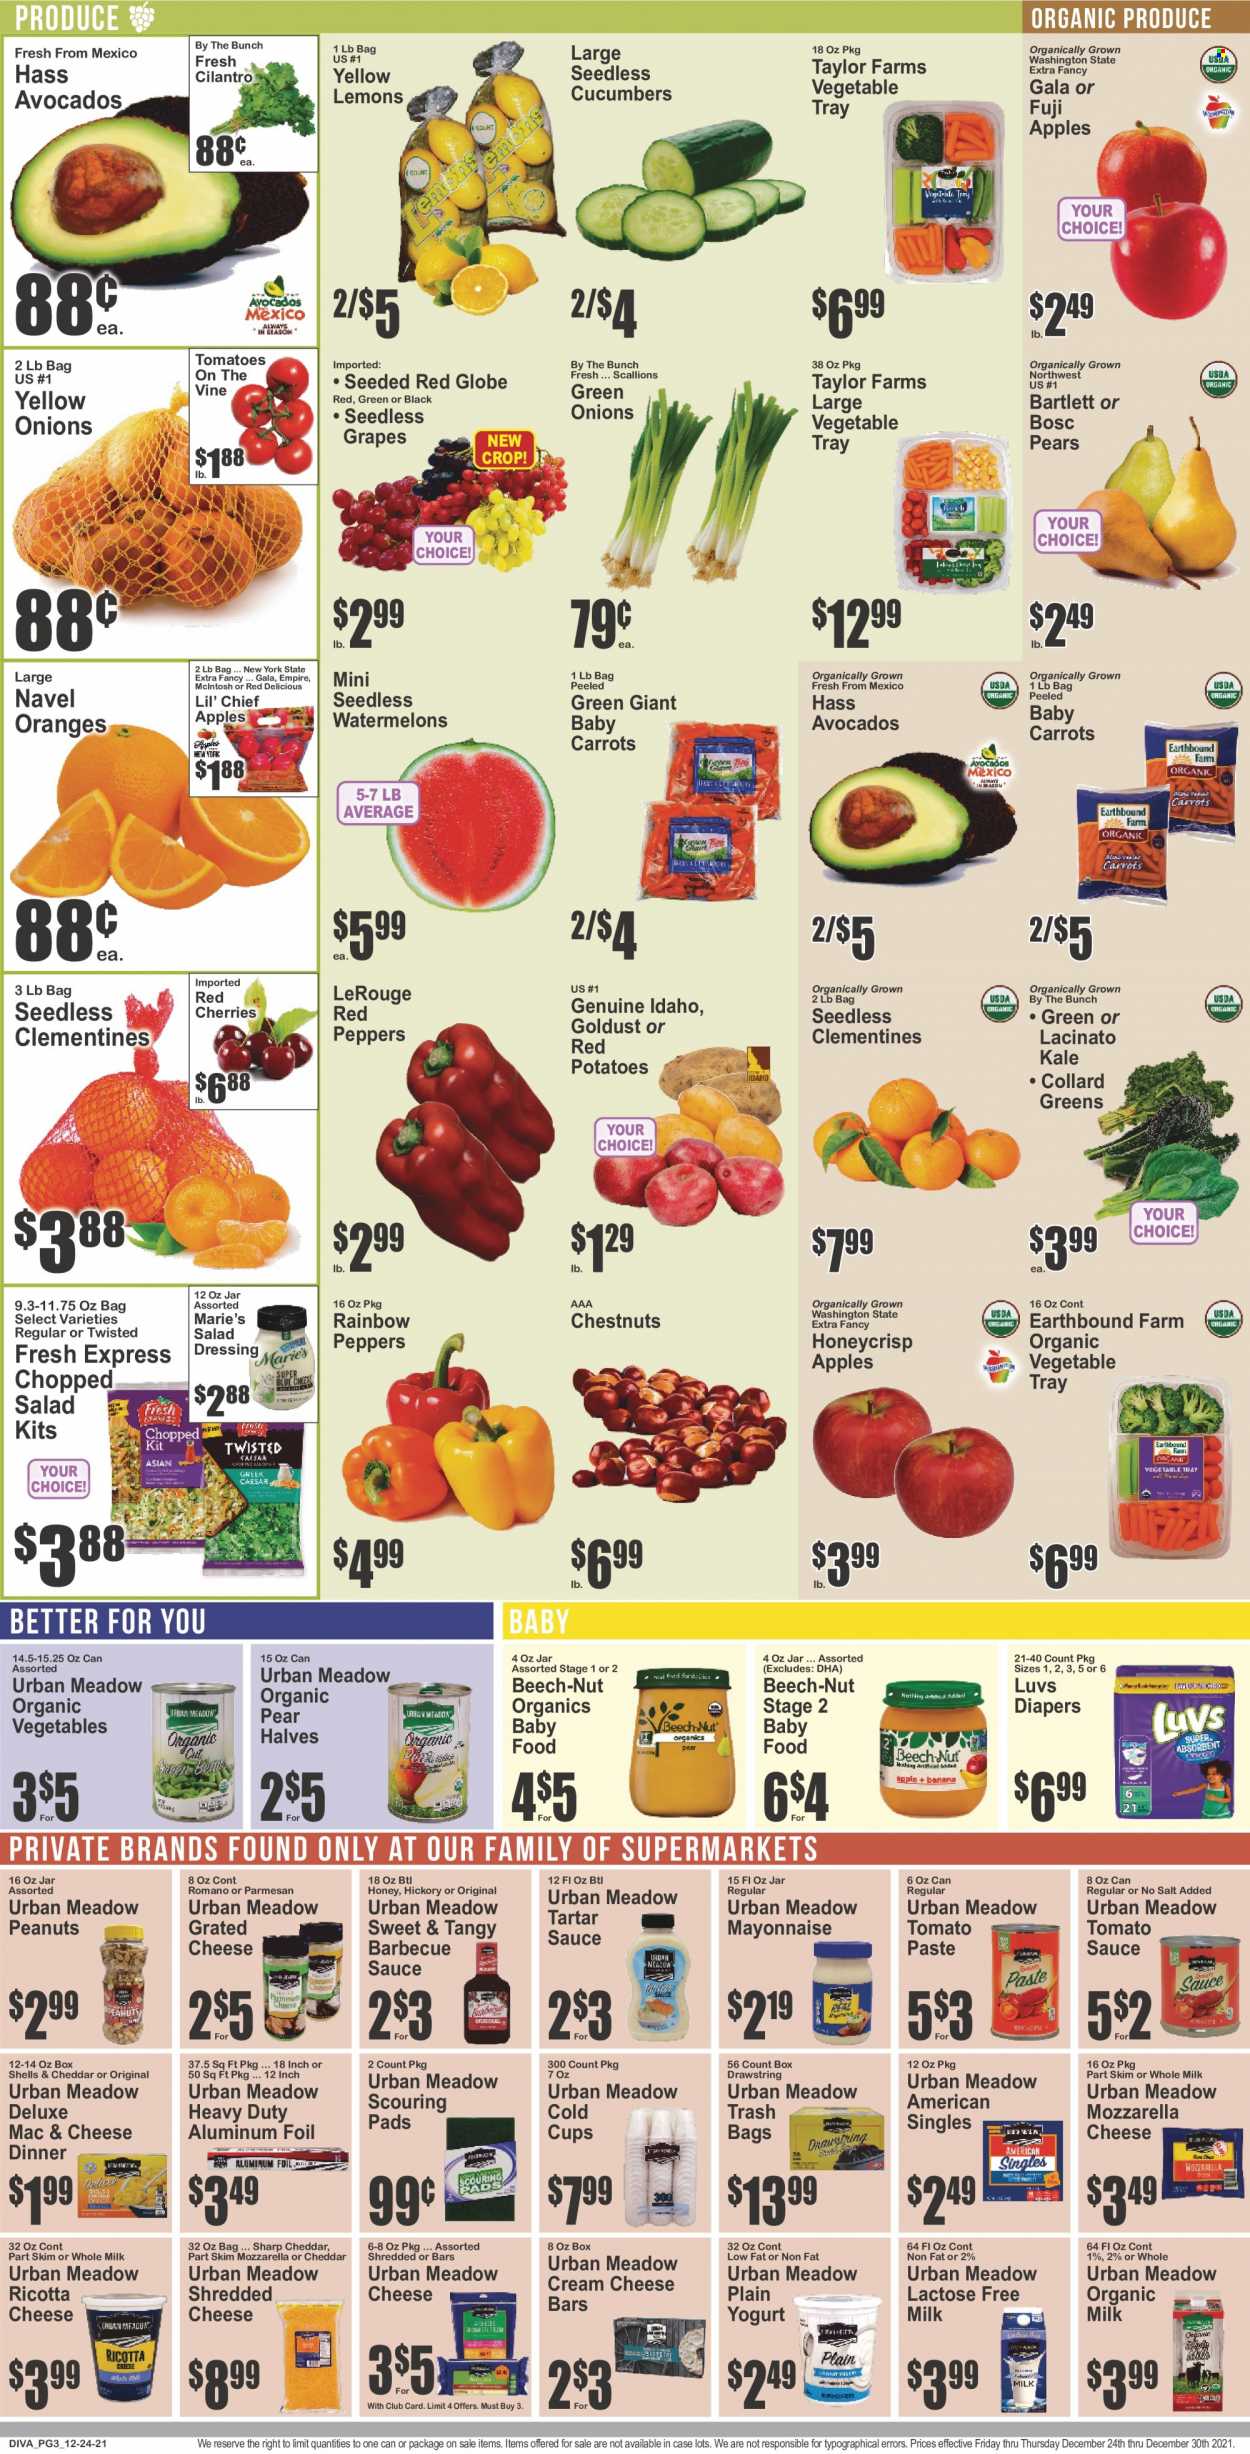 thumbnail - Key Food Flyer - 12/24/2021 - 12/30/2021 - Sales products - seedless grapes, carrots, cucumber, collard greens, kale, potatoes, peppers, red potatoes, red peppers, apples, avocado, Gala, grapes, Red Delicious apples, Red Globe, cherries, pears, oranges, Fuji apple, cream cheese, mozzarella, ricotta, shredded cheese, parmesan, grated cheese, yoghurt, organic milk, lactose free milk, mayonnaise, tartar sauce, tomato paste, tomato sauce, cilantro, BBQ sauce, salad dressing, dressing, chestnuts, peanuts, nappies, trash bags, tray, cup, clementines, lemons, navel oranges. Page 3.